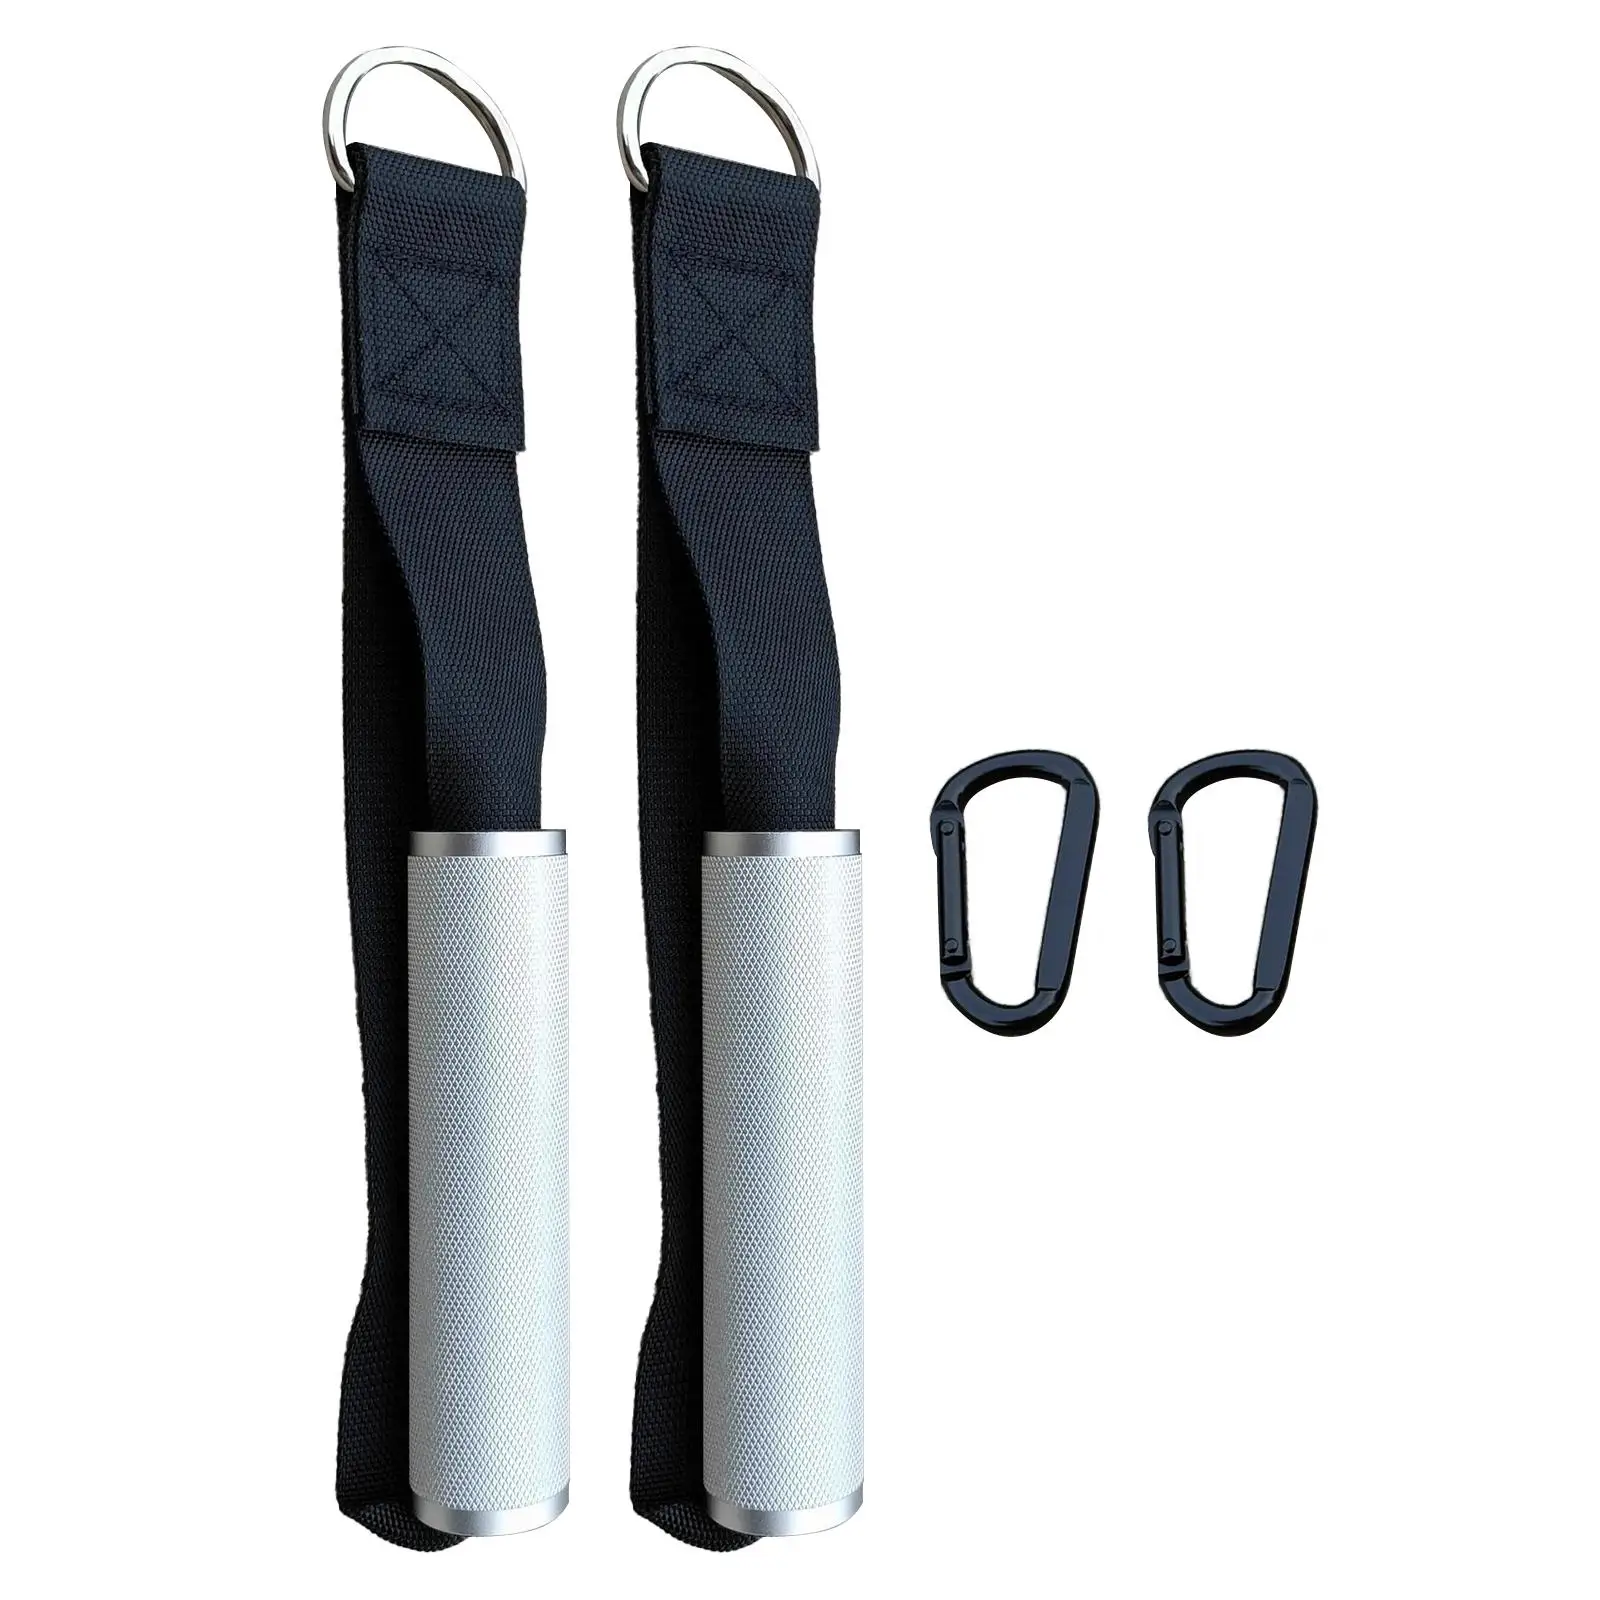 2x Gyms Handles Universal Gymnastics Hanging Resistance Exercise Workout Accs Exercise Device Metal for Pilates Yoga